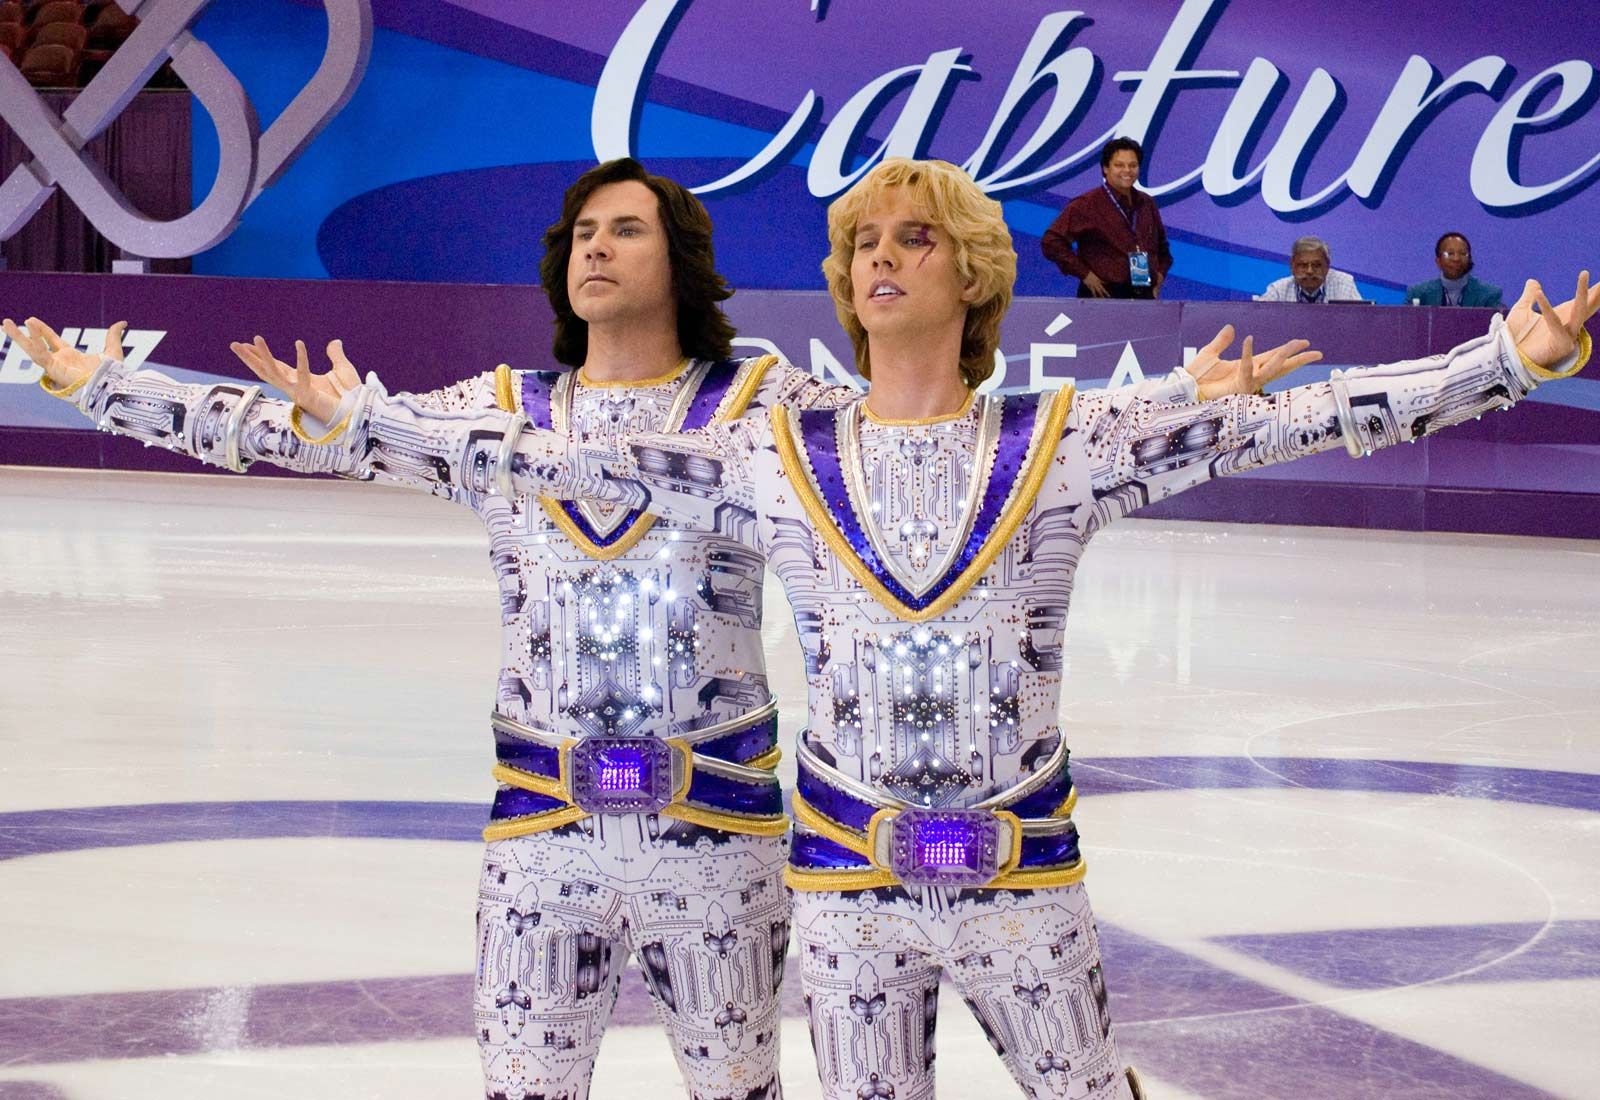 Will Ferrell and Jon Heder in 'Blades of Glory'